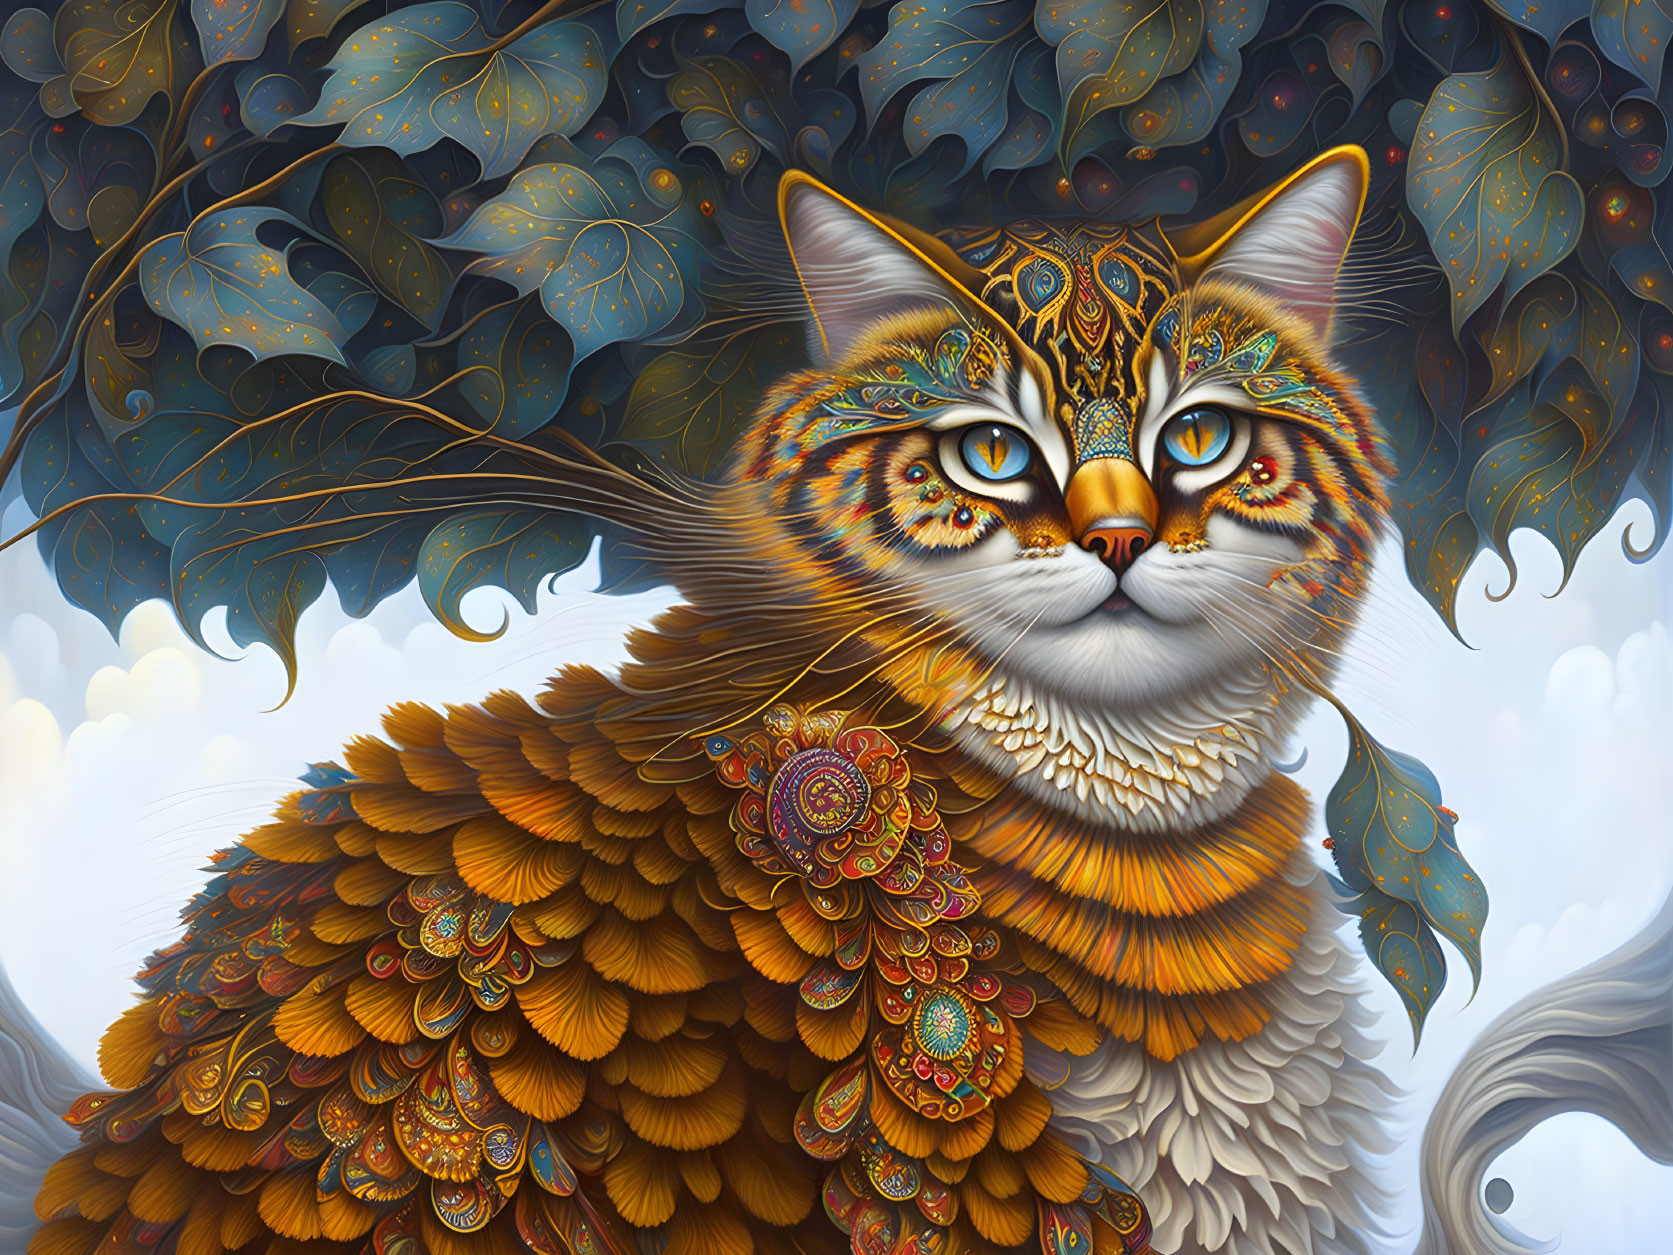 Colorful Illustration of a Fantastical Cat with Elaborate Feathers